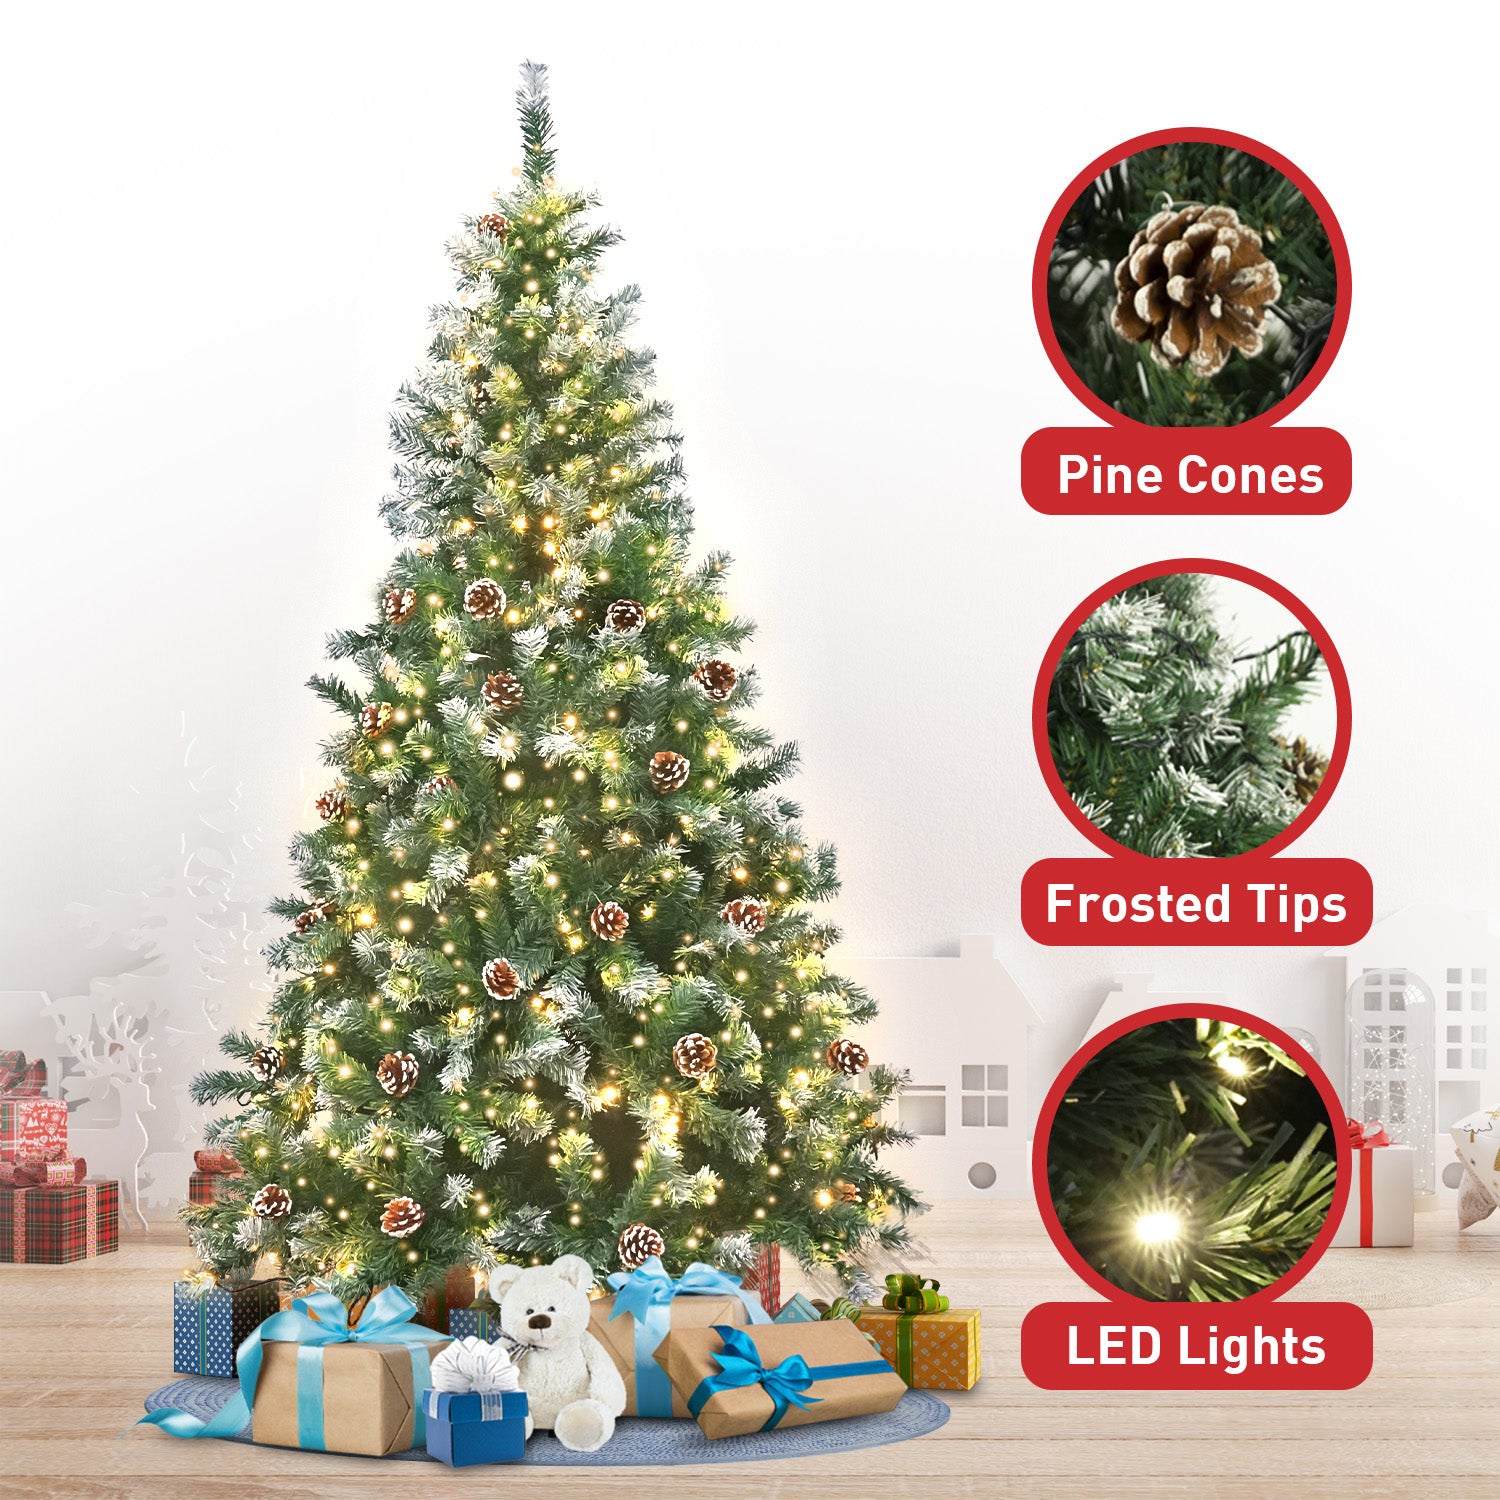 Christabelle 1.8m Pre Lit LED Christmas Tree Decor with Pine Cones Xmas Decorations - SILBERSHELL